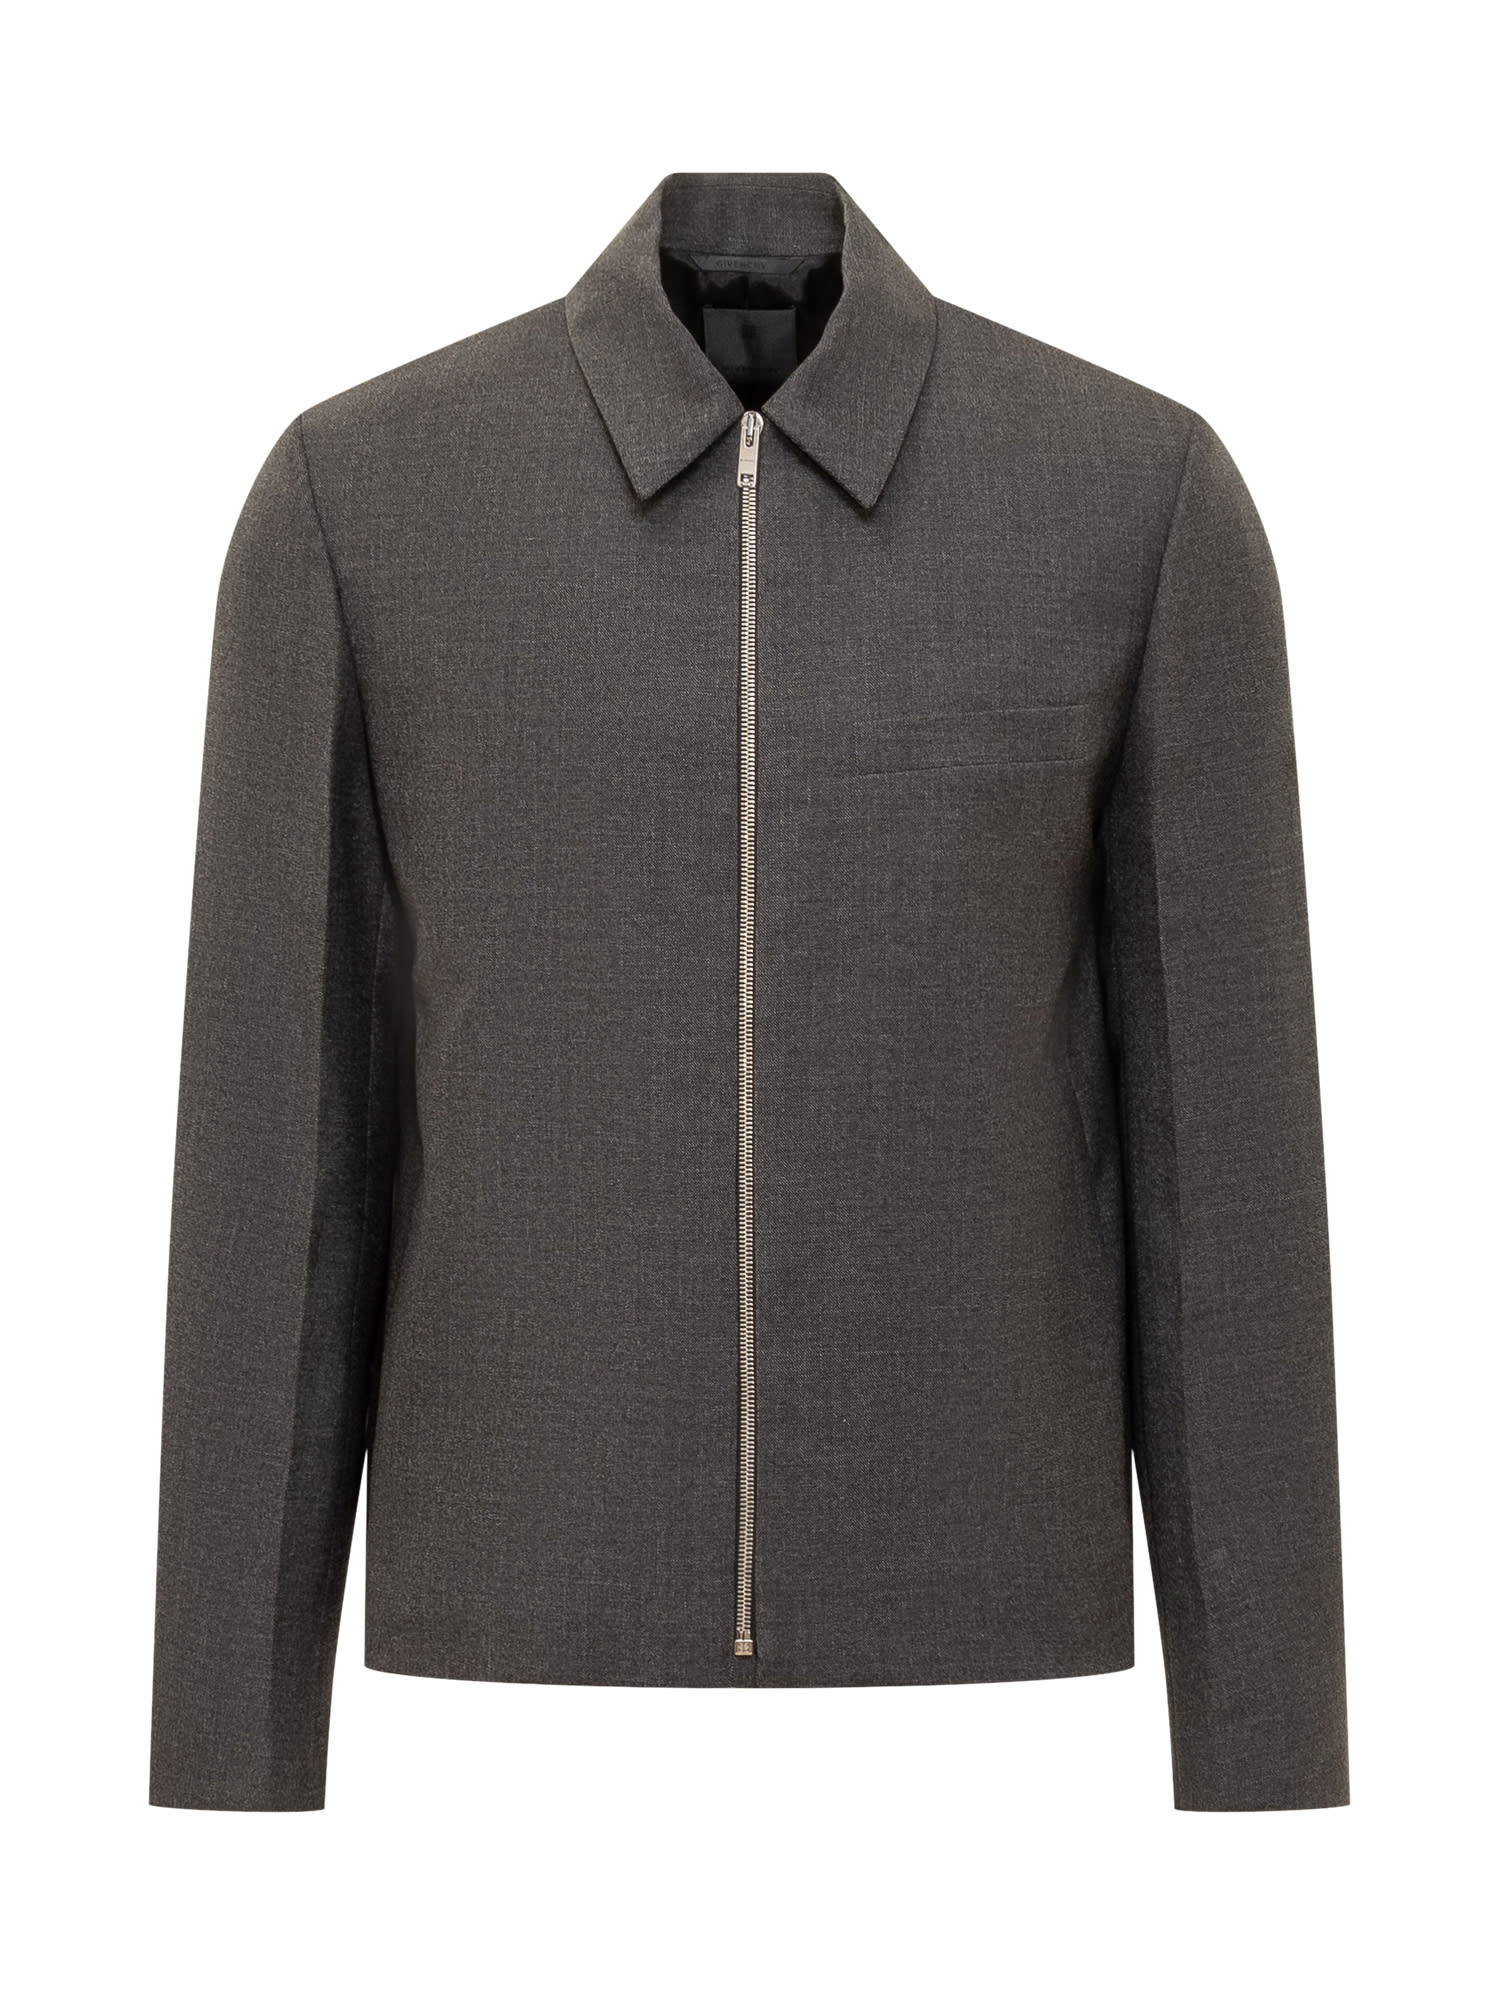 Givenchy Wool Zipped Jacket In Grey Mix